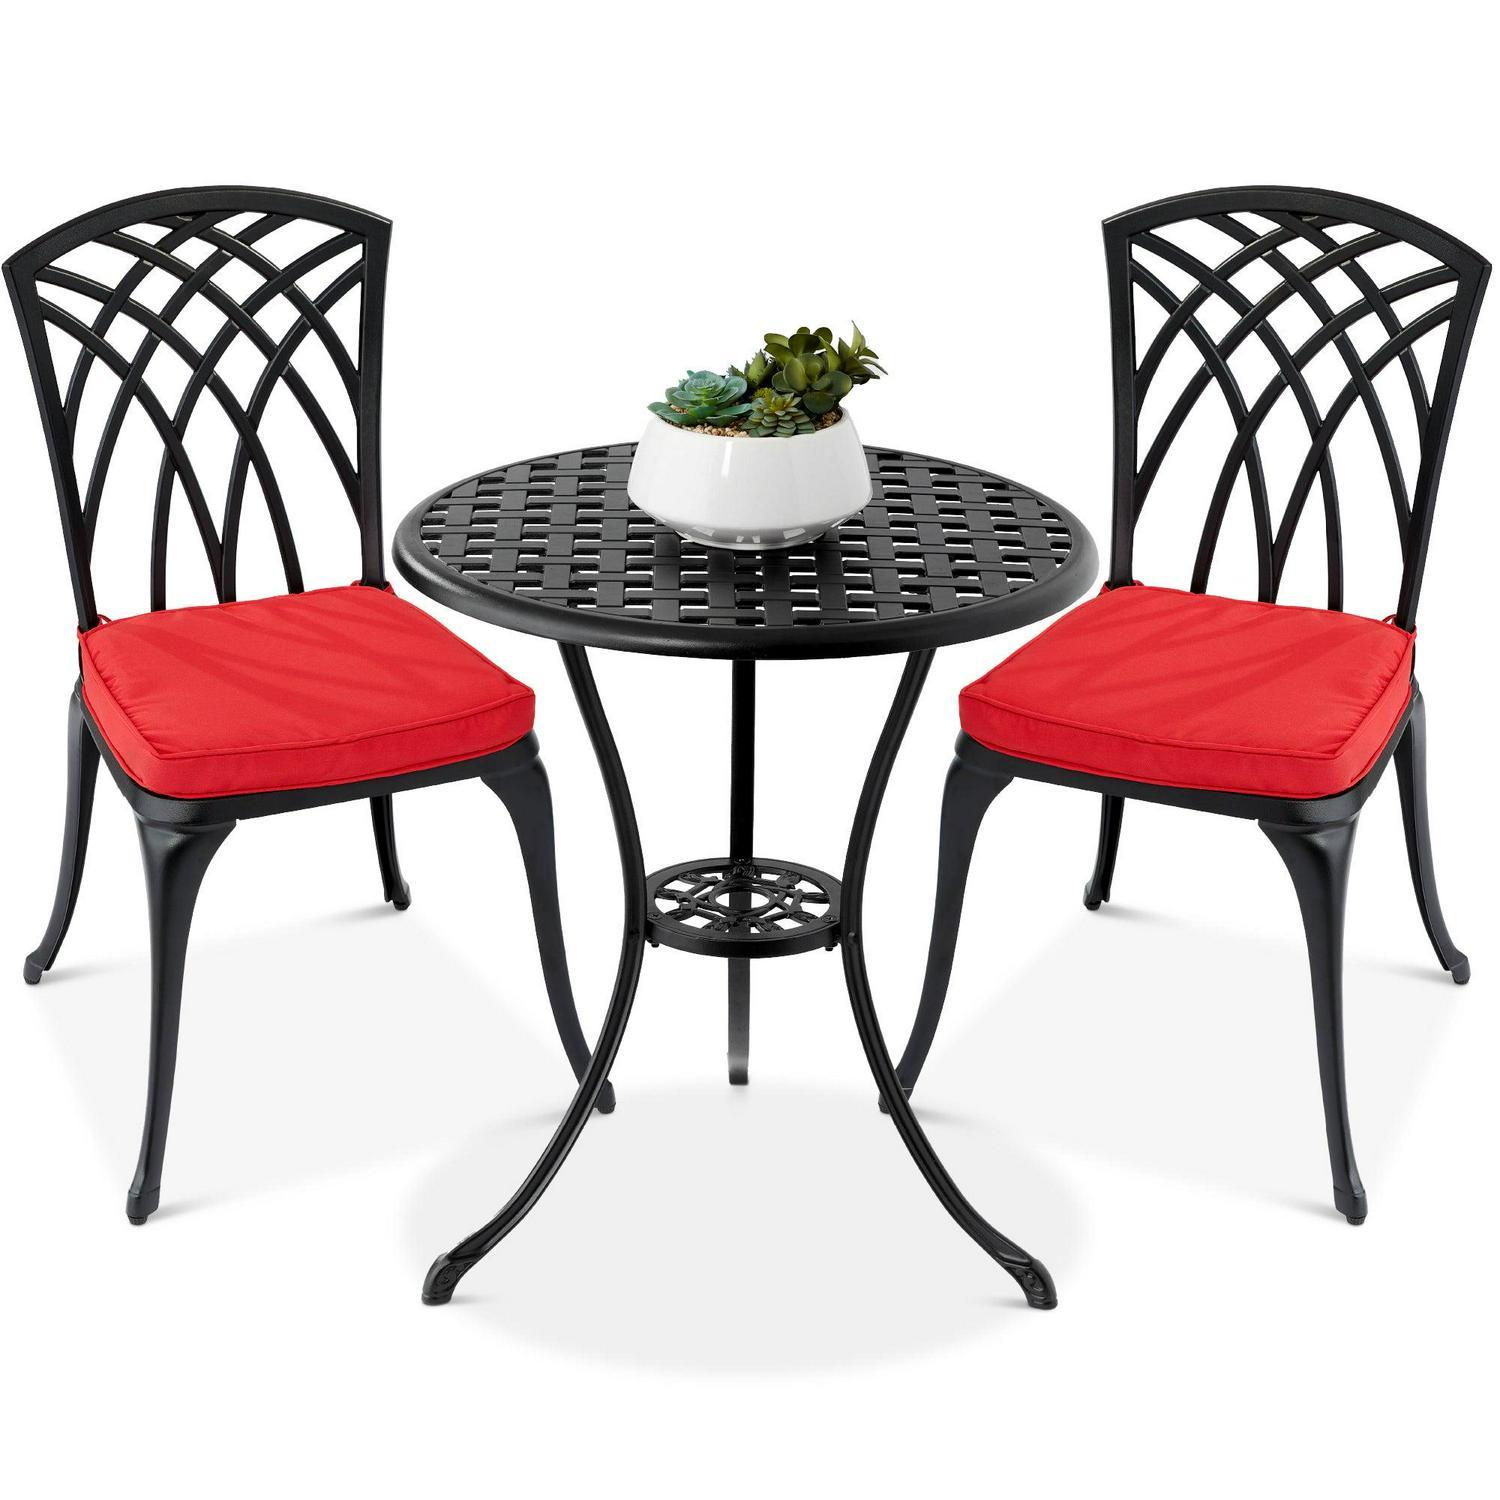 Primary image for Patio Bistro Set 3-Piece W/ Umbrella Hole, 2 Chairs, Polyester Cushions